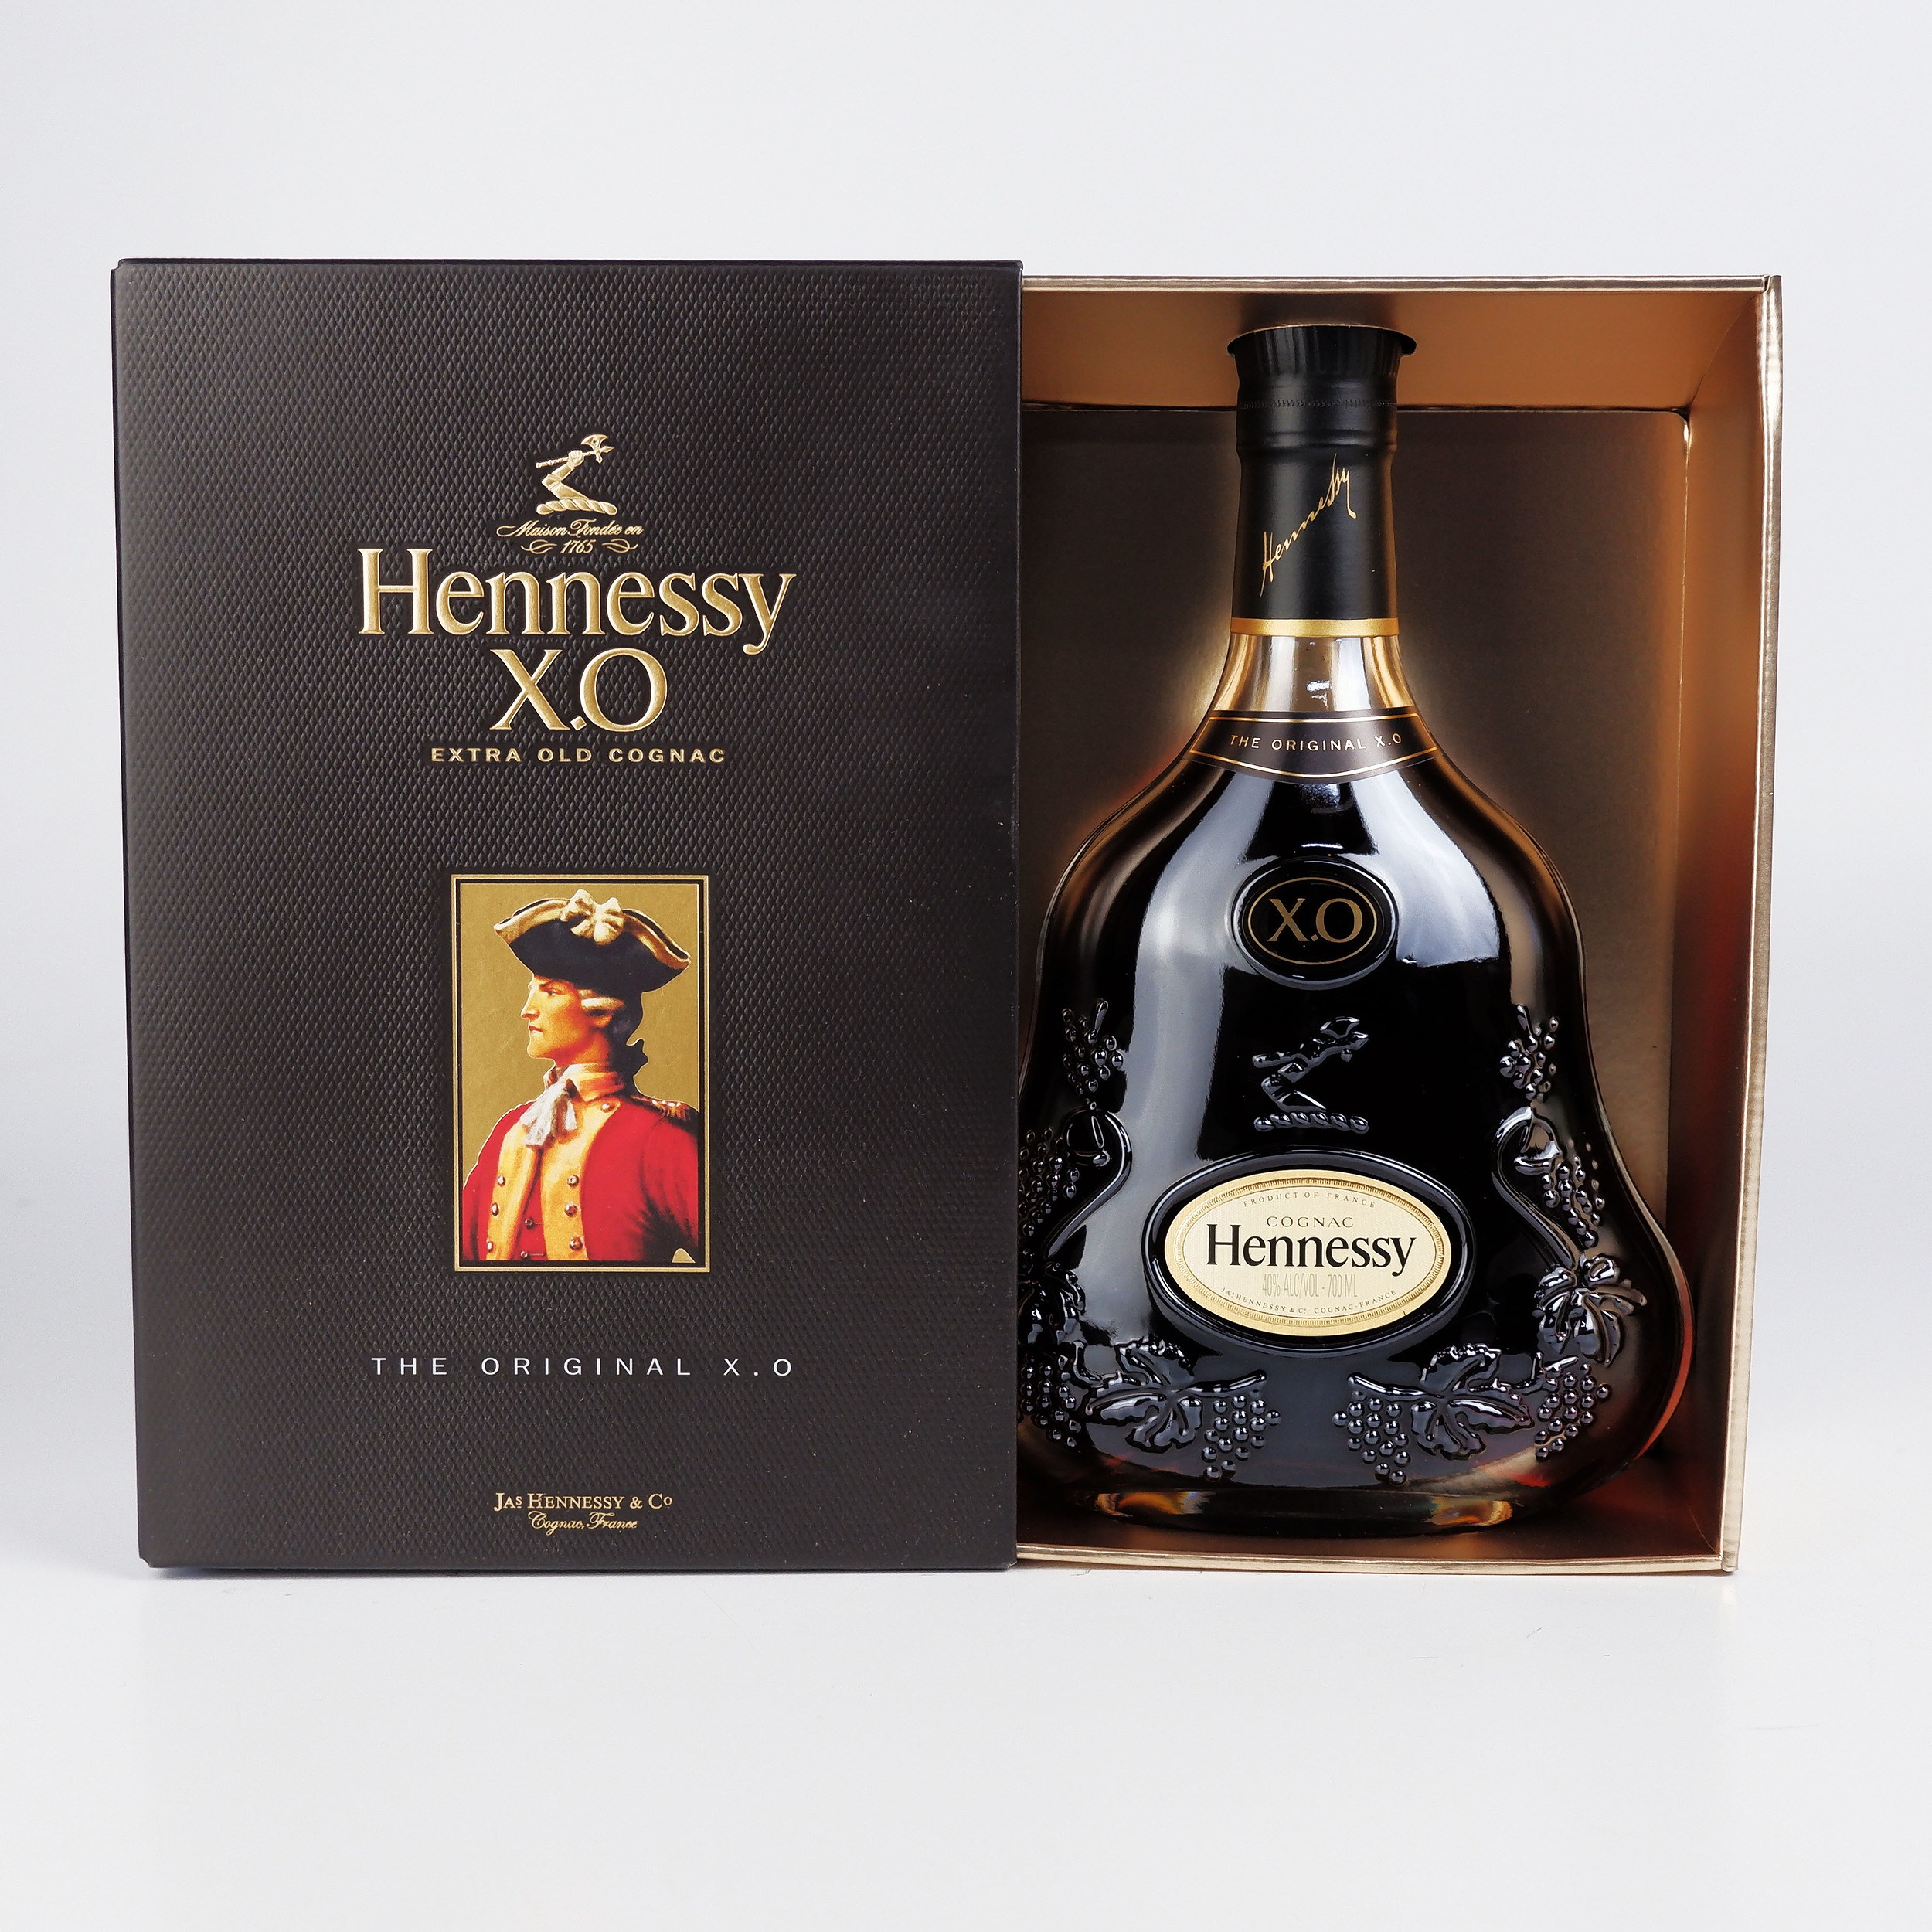 Hennessy X.0 Extra Old Cognac 700ml - Lot 1225081 | ALLBIDS